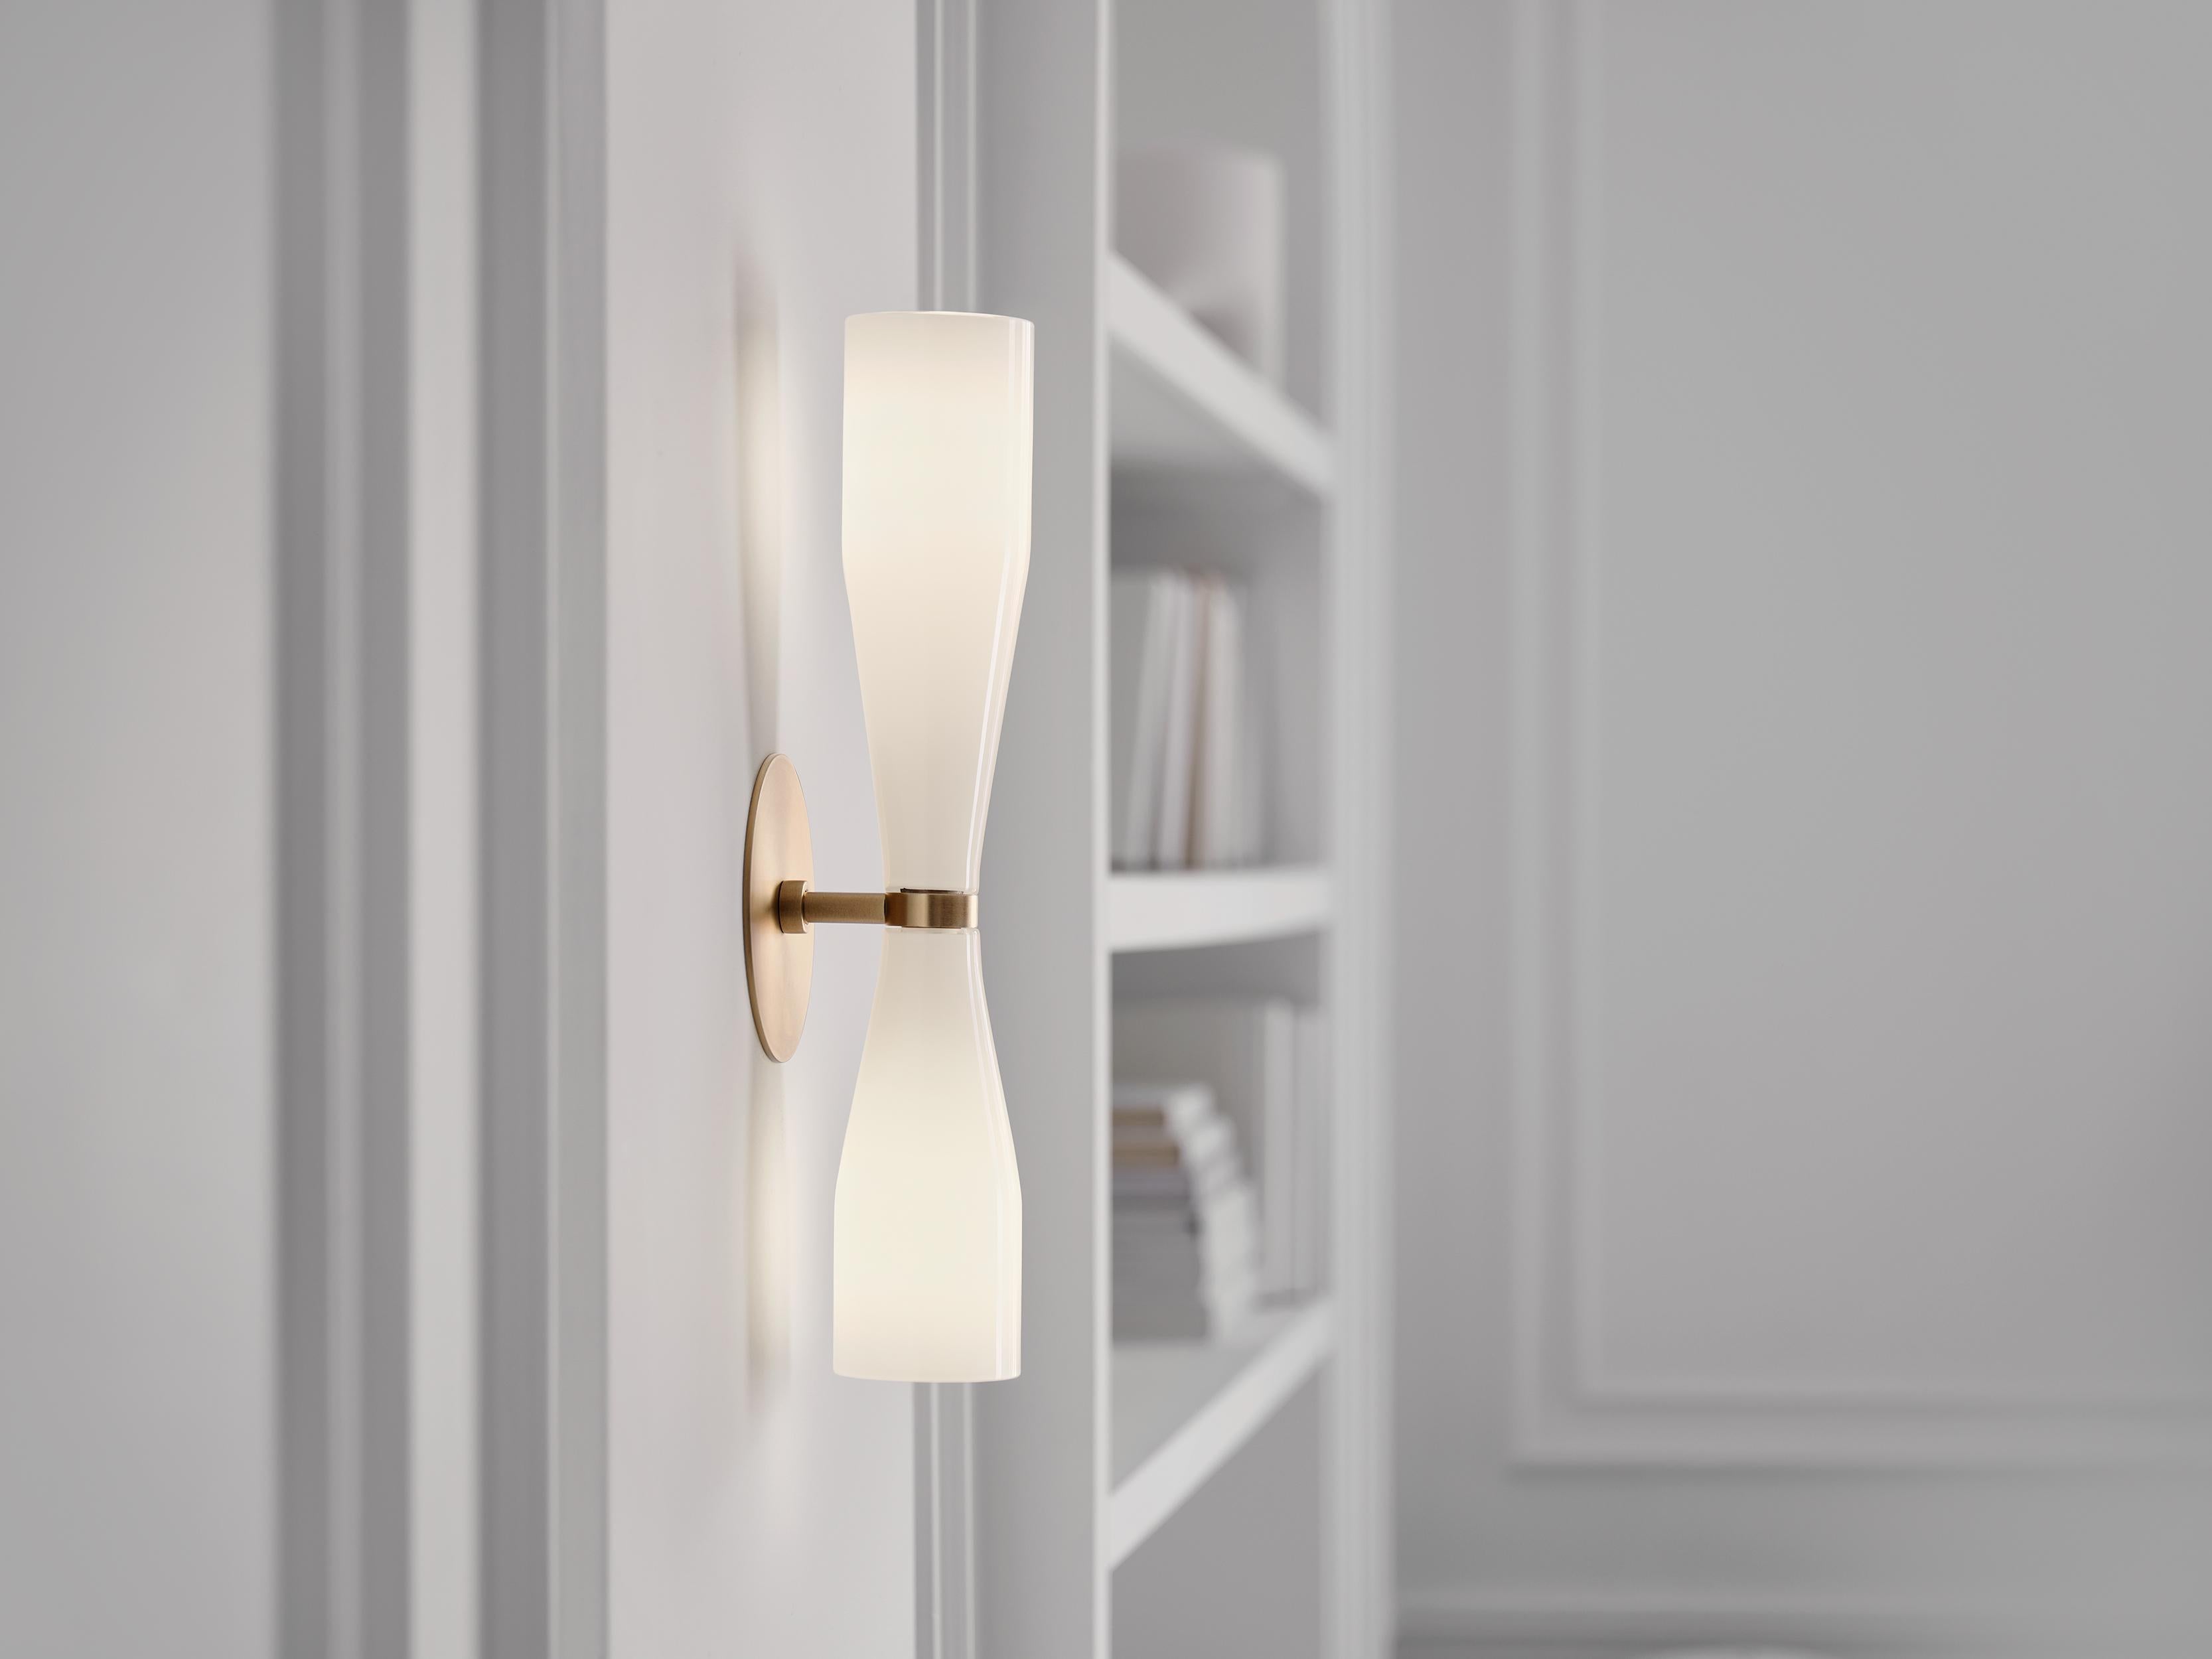 The Etcetera Sconce balances the sculptural with the streamlined. 

With an organic feel, the Etcetera Series uses design geometry to create pieces that are both clean-lined but natural. 

Entirely hand-made in Canada, Etcetera uses a small